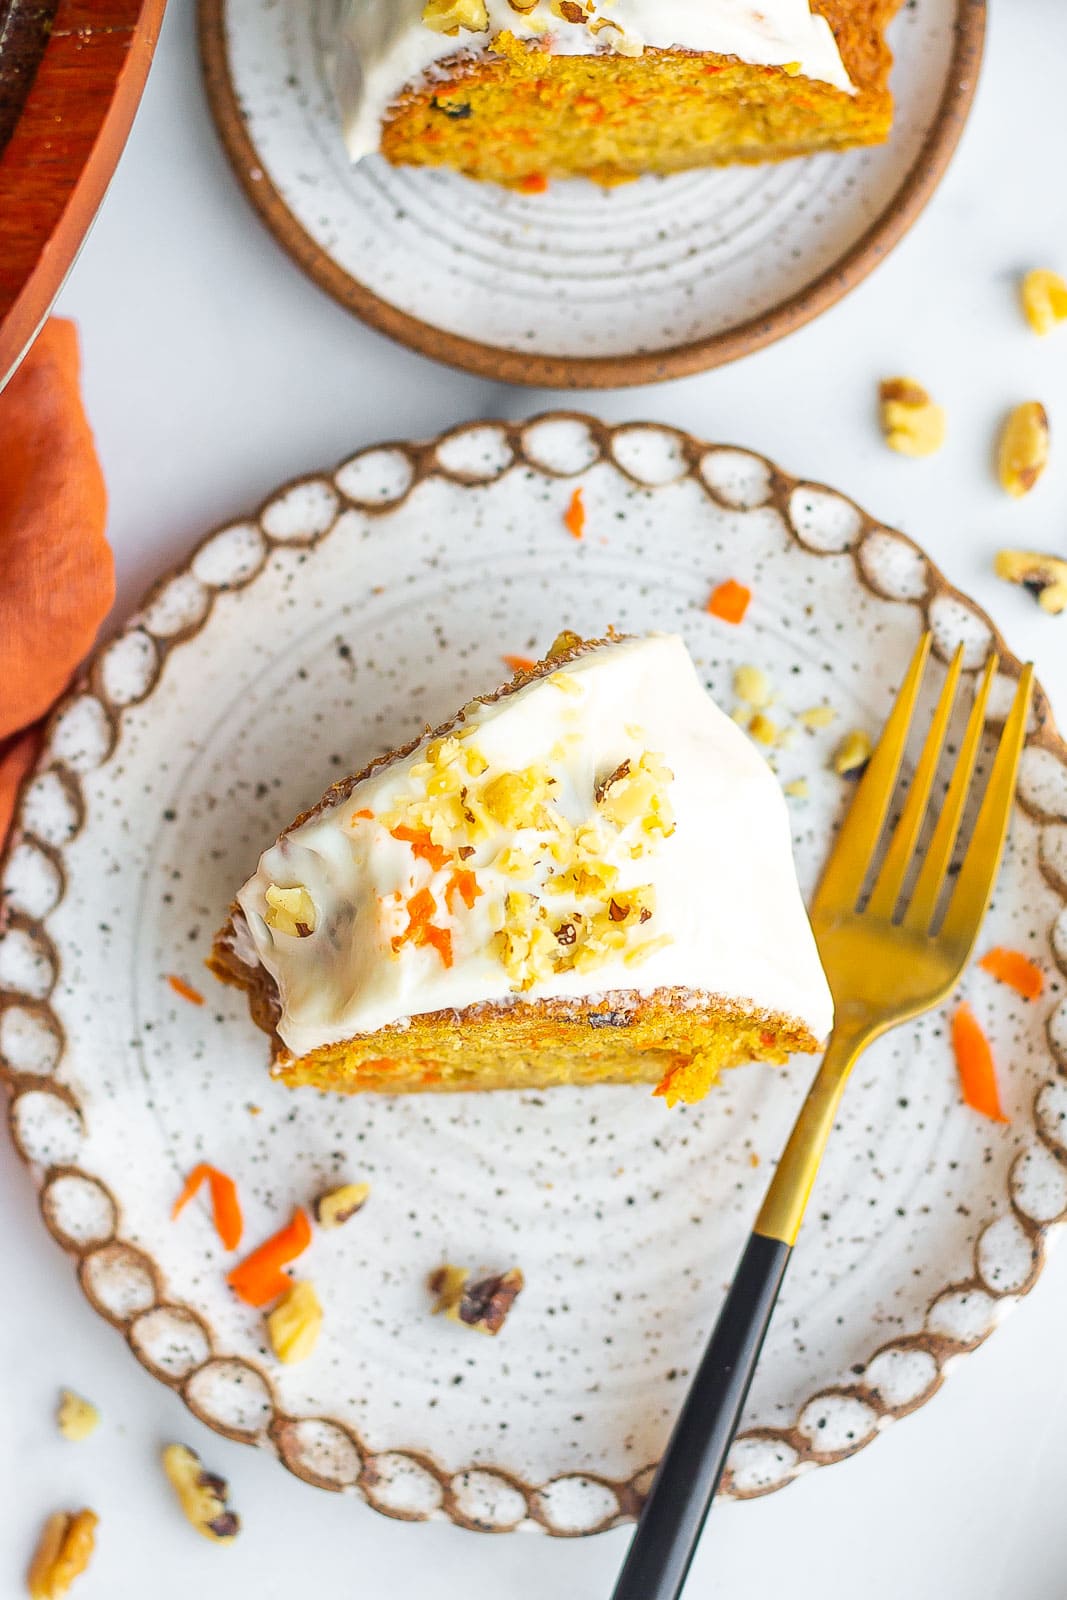 carrot cake slices on plates